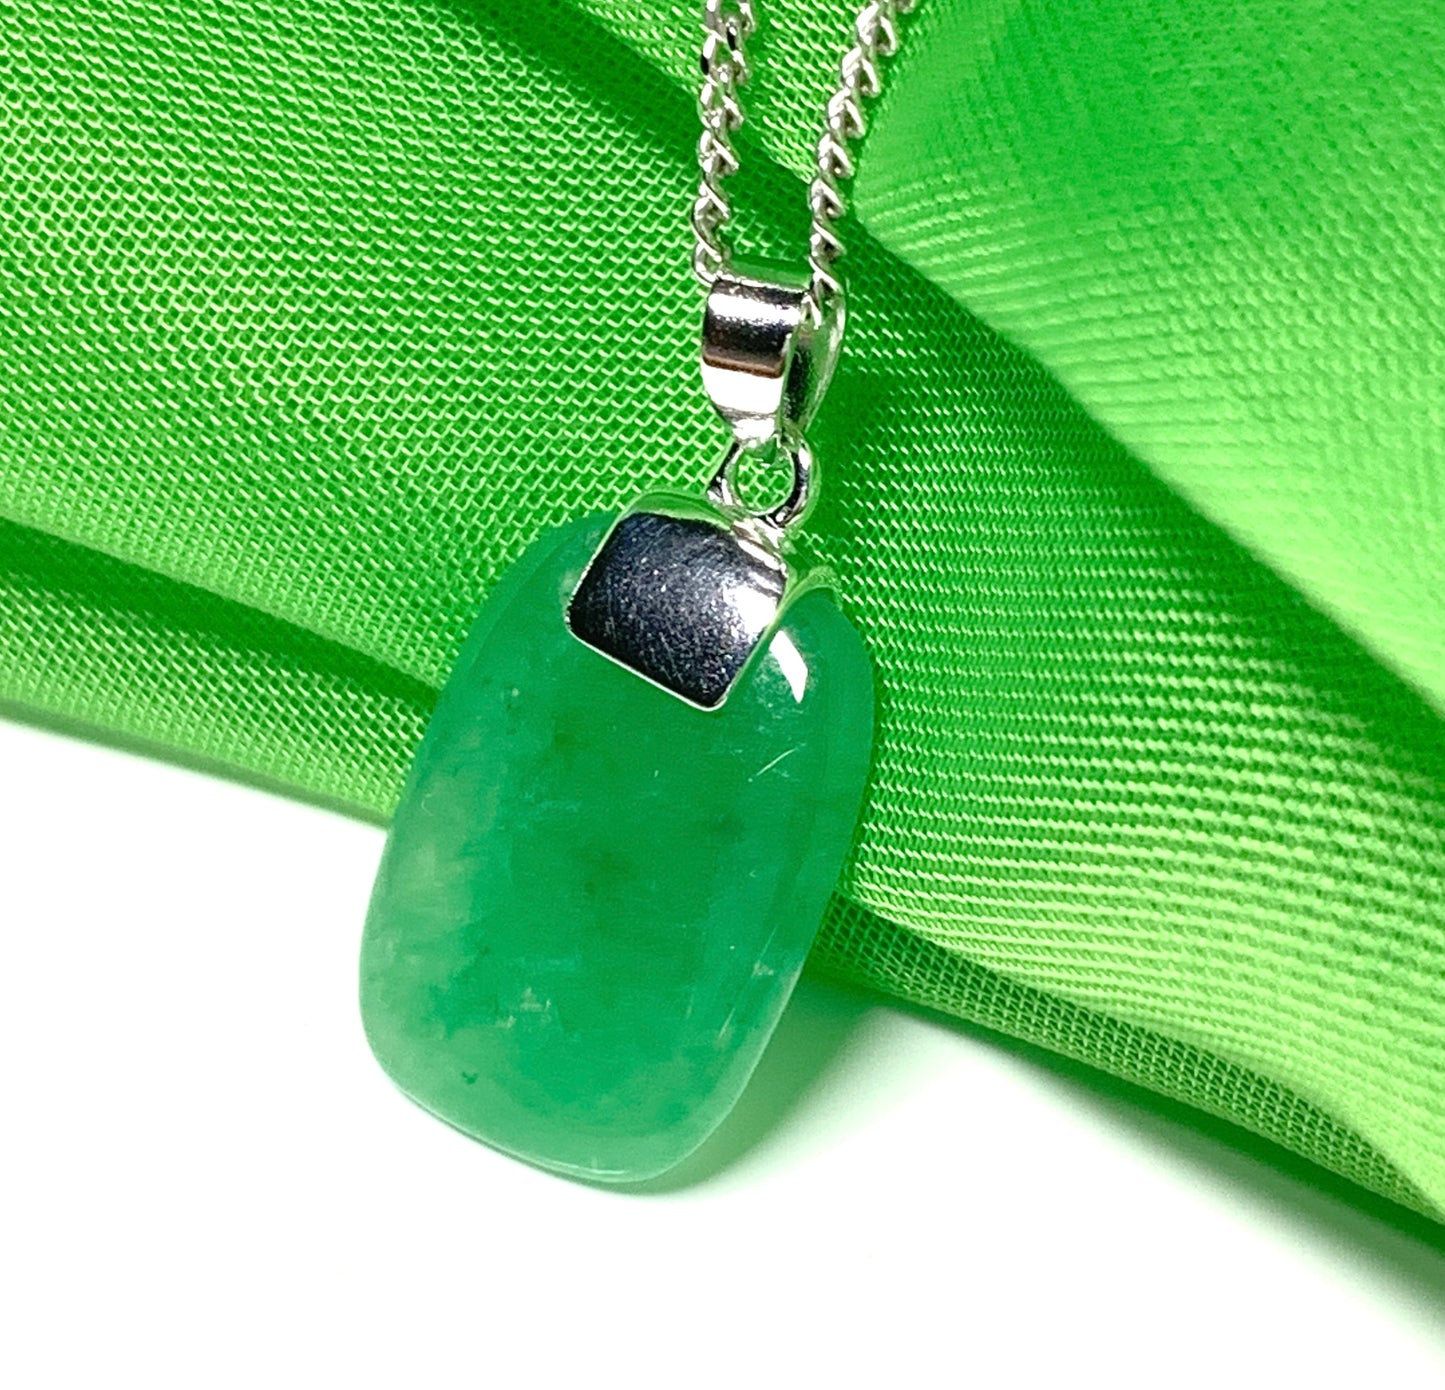 Green jade real necklace cushion shaped stone sterling silver pendant